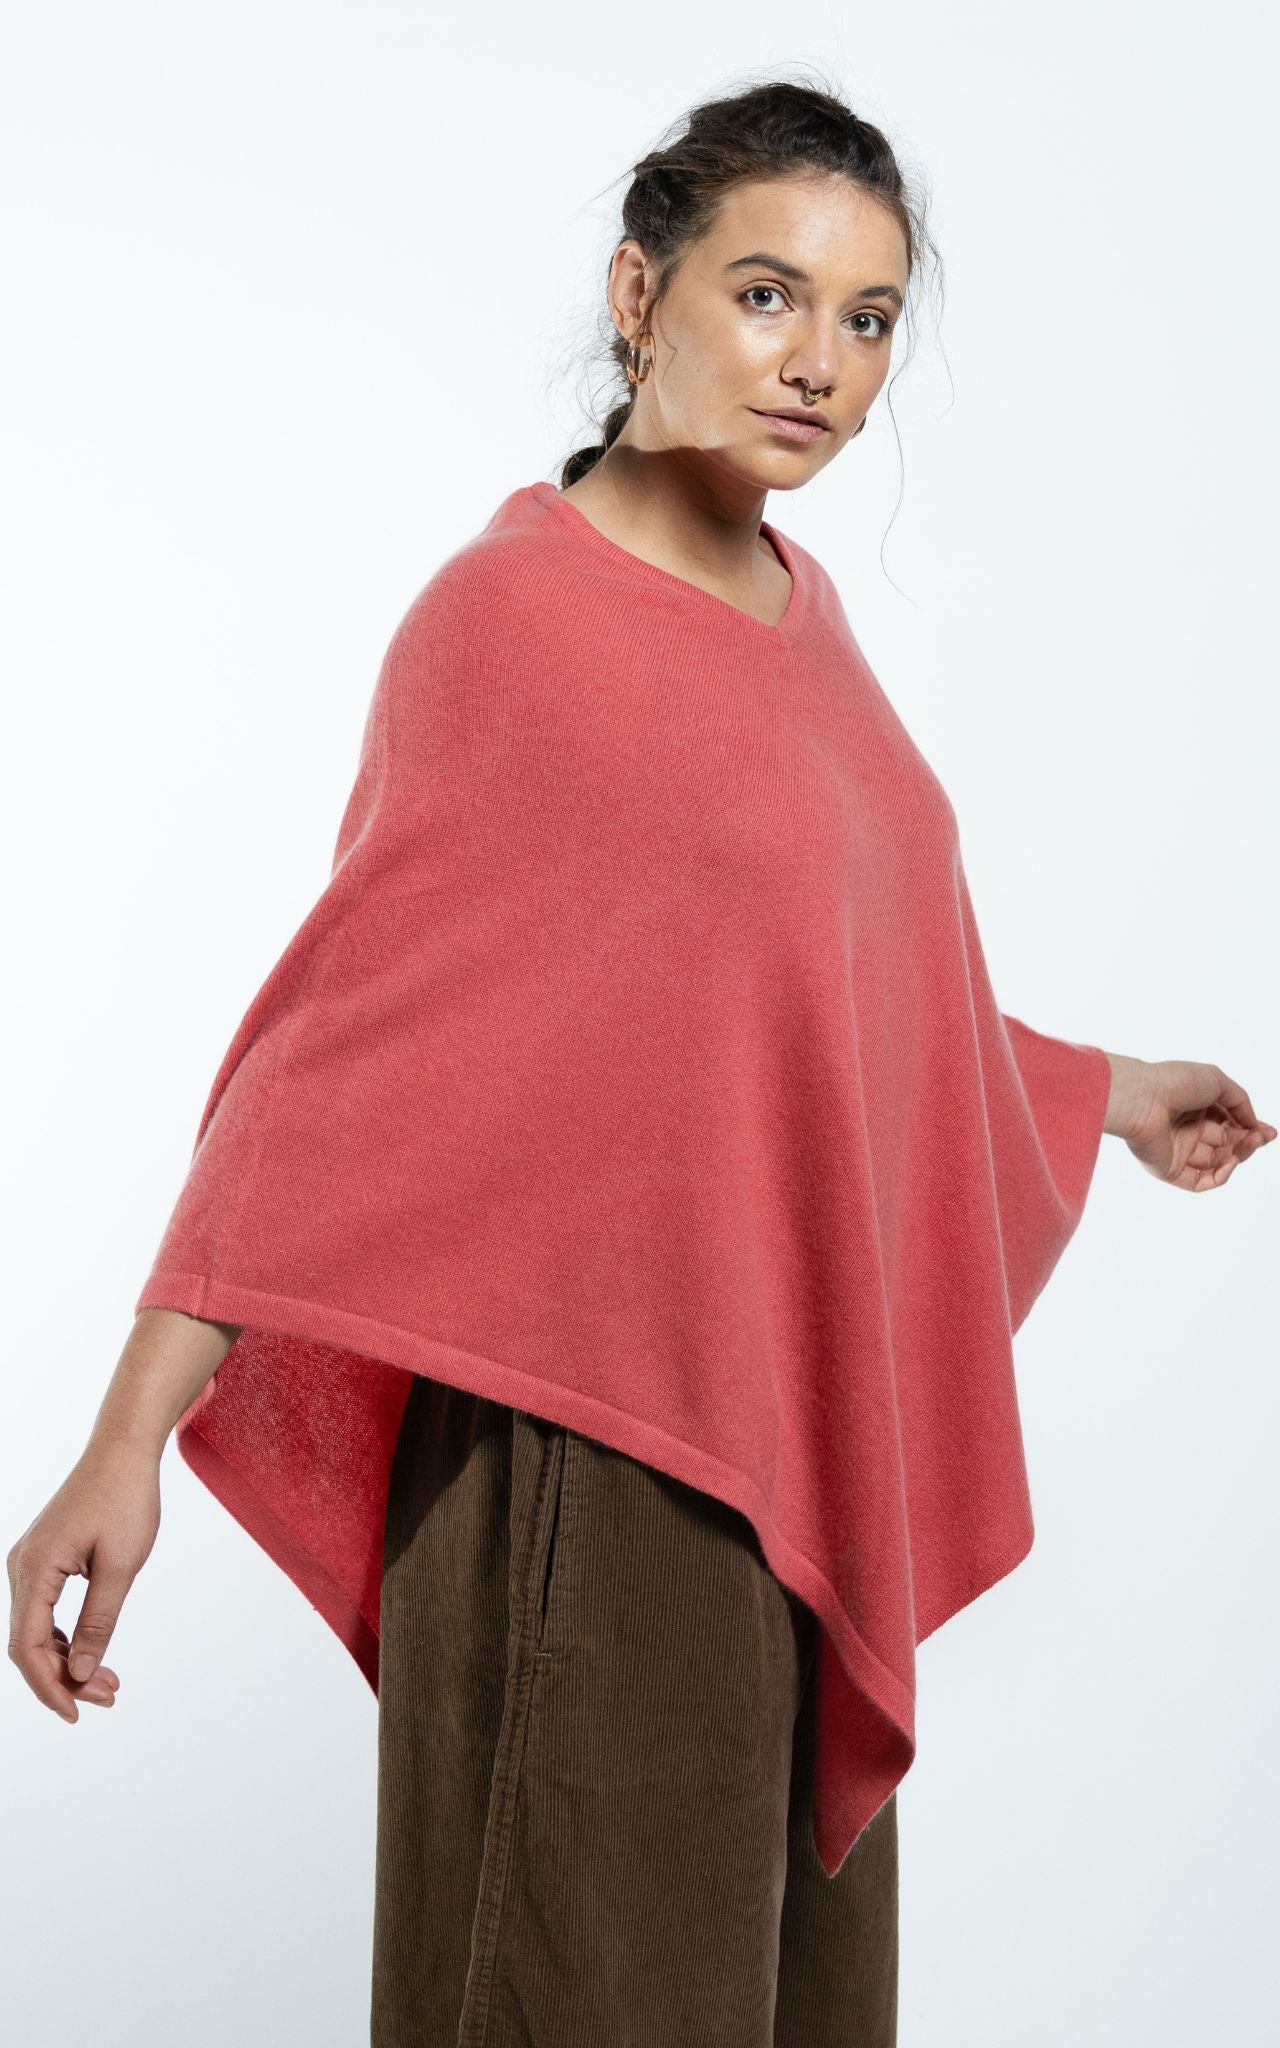 Surya Australia Ethical Cashmere Poncho made in Nepal - Coral